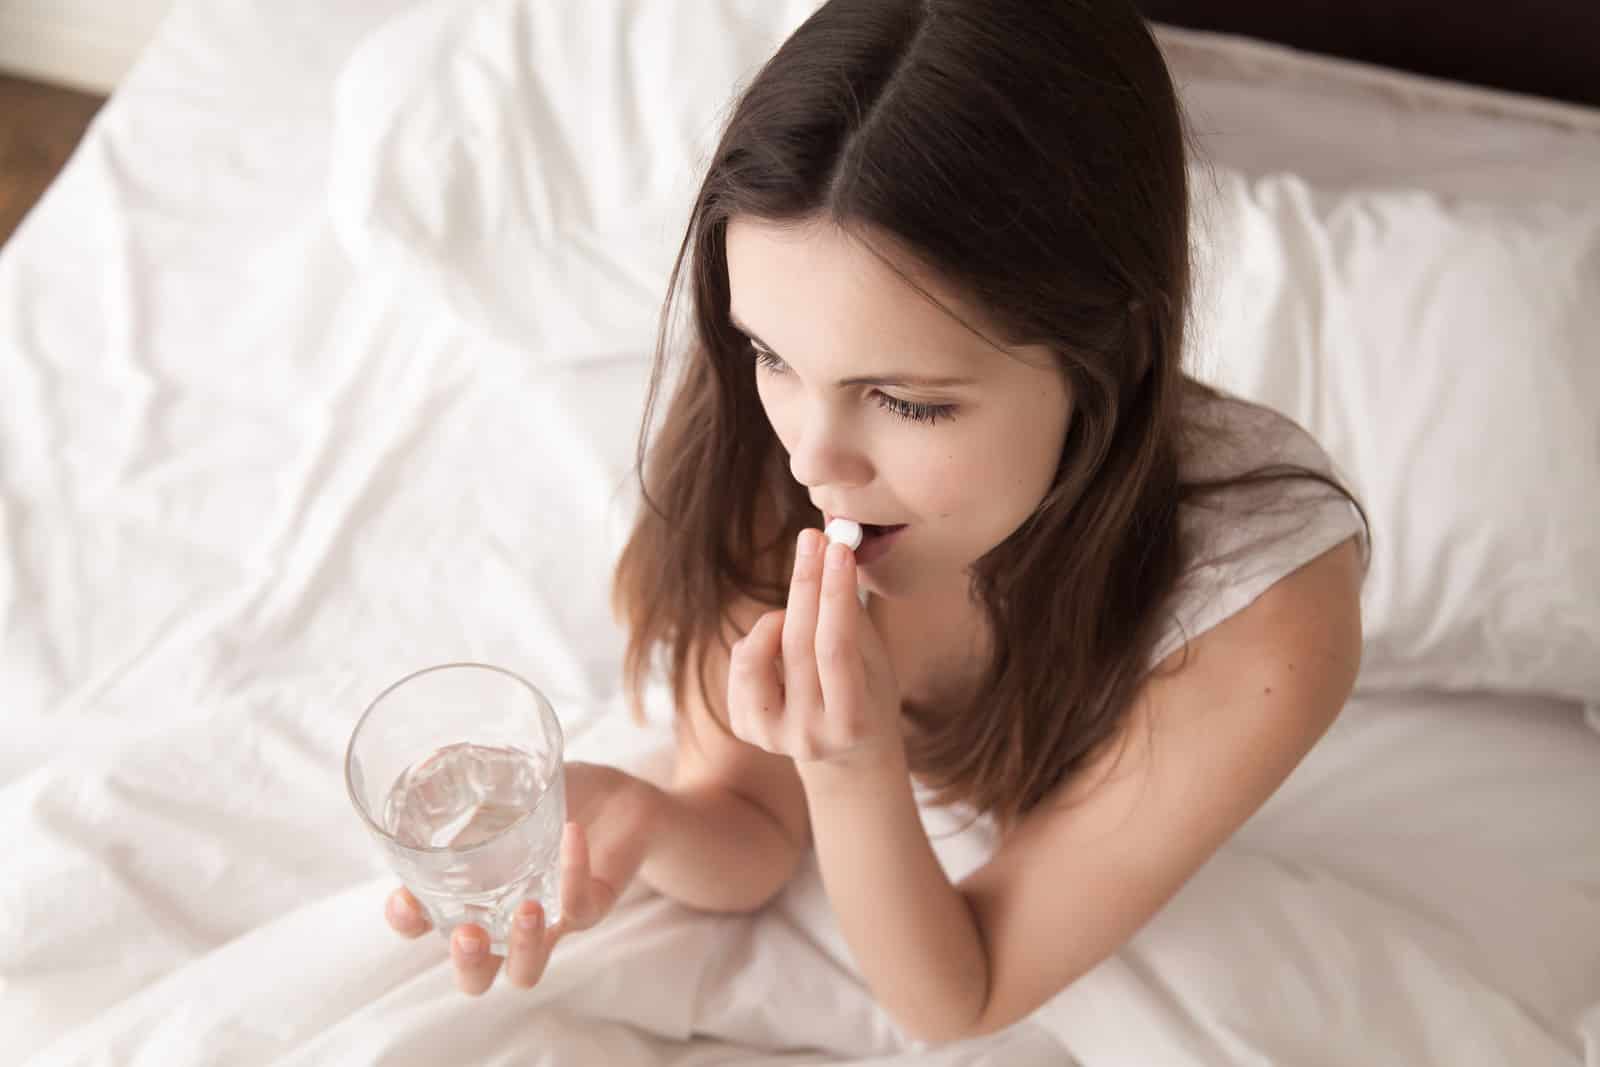 women and drug addiction - Stressed woman drinking white round pill while sitting in bed with glass of water in hand.